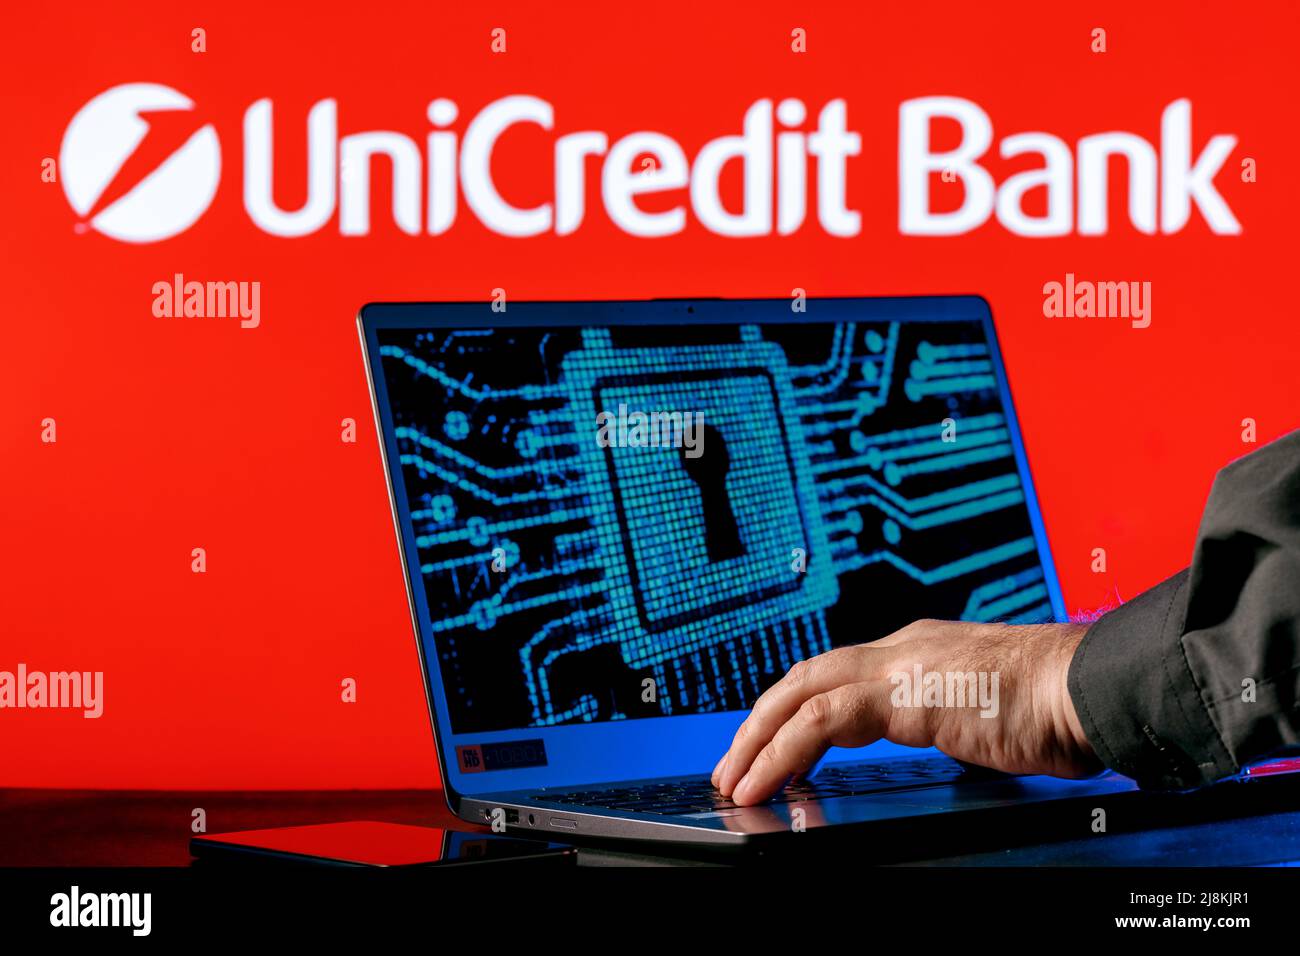 Laptop with lock symbol on screen on background of  UniCredit bank logo. Finger points to lock symbol. Concept of data hacking. Stock Photo